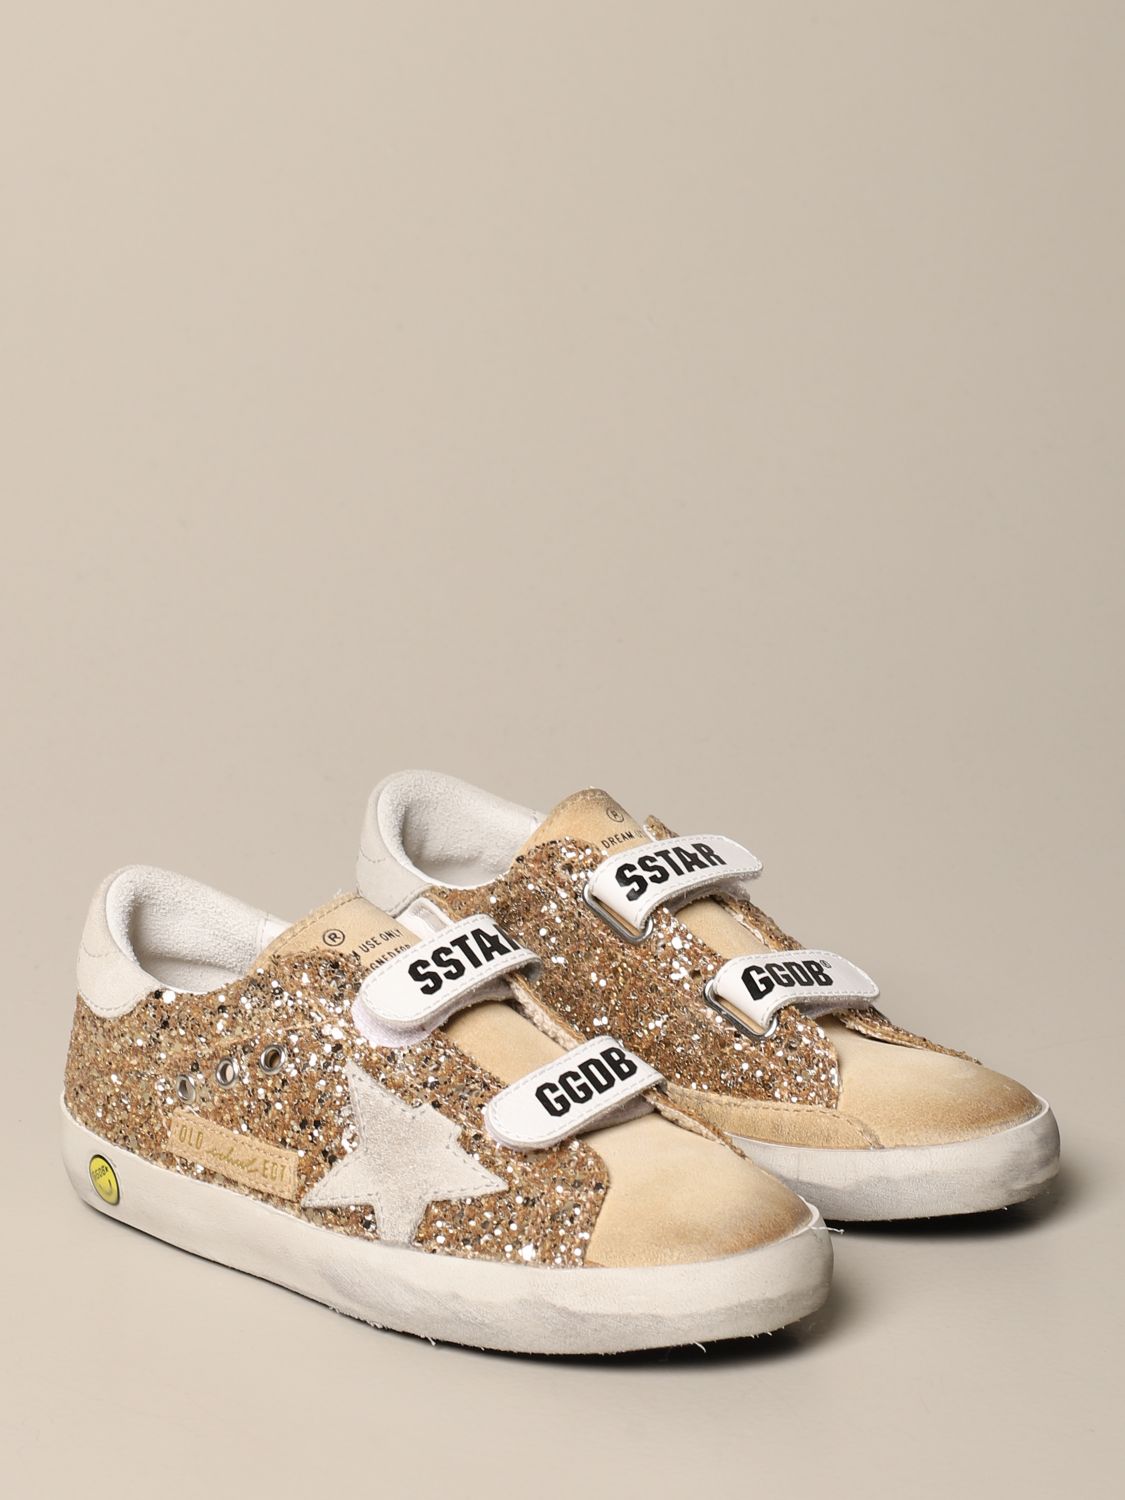 Old School Golden Goose sneakers in suede and glitter | Shoes Golden ...